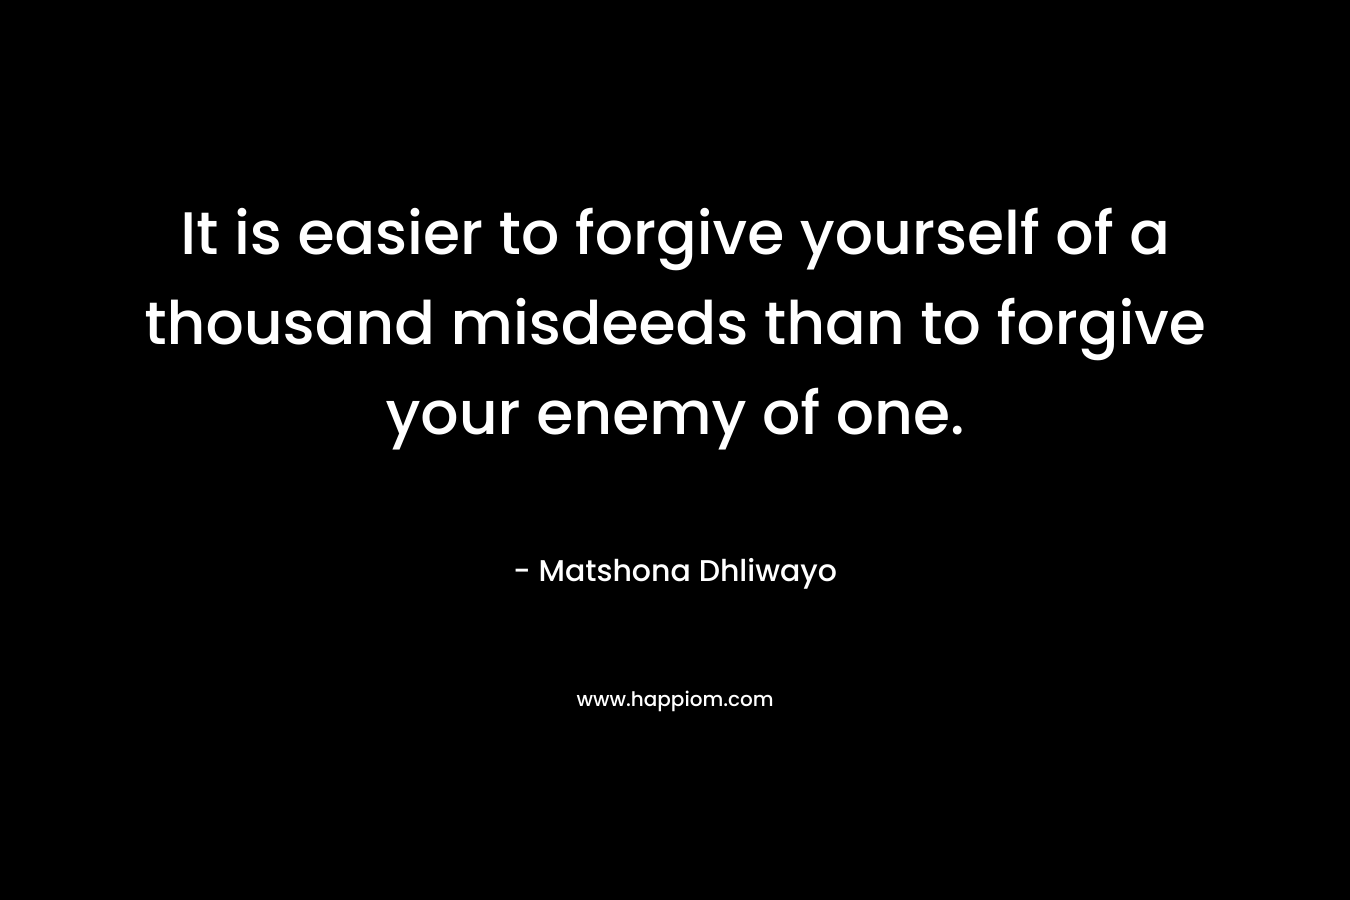 It is easier to forgive yourself of a thousand misdeeds than to forgive your enemy of one. – Matshona Dhliwayo